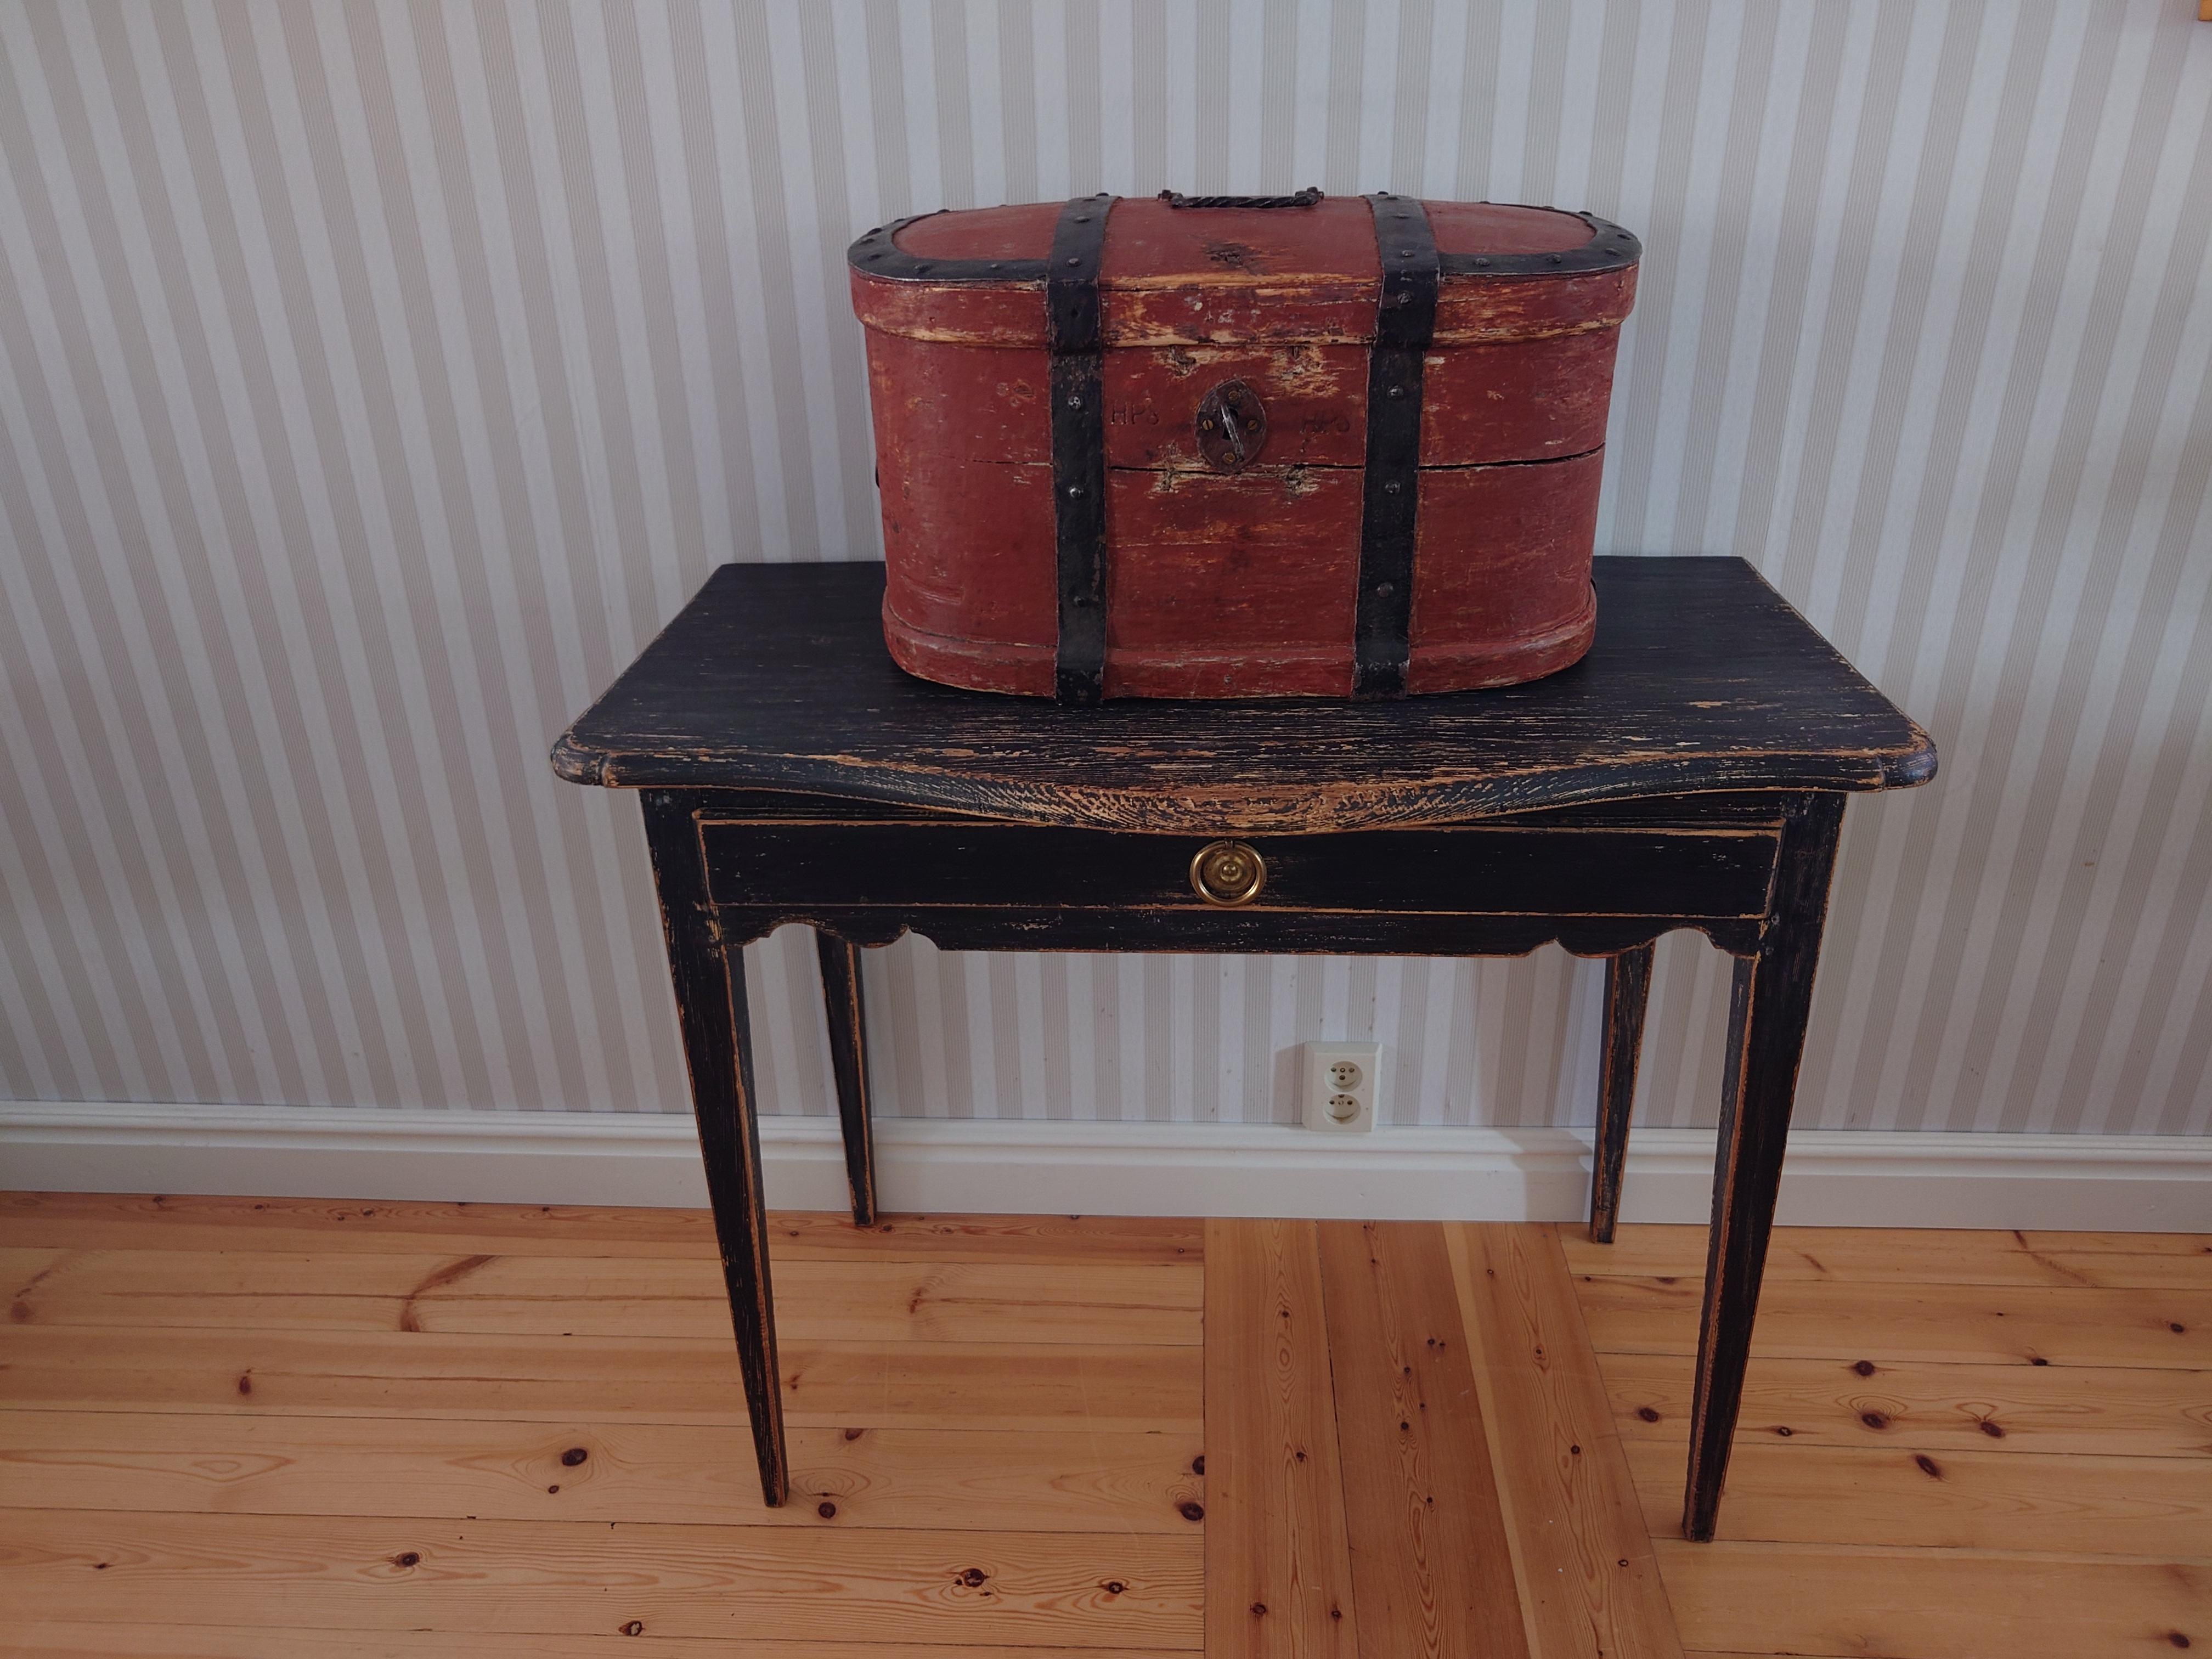 Early 19th century Swedish Folk Art travel box from Skellefteå Västerbotten, Northern Sweden.
Beautiful untouched originalpaint.
Decorated with handwrought iron around the box and over the lid.
Original lock & Key.
The box was used to store